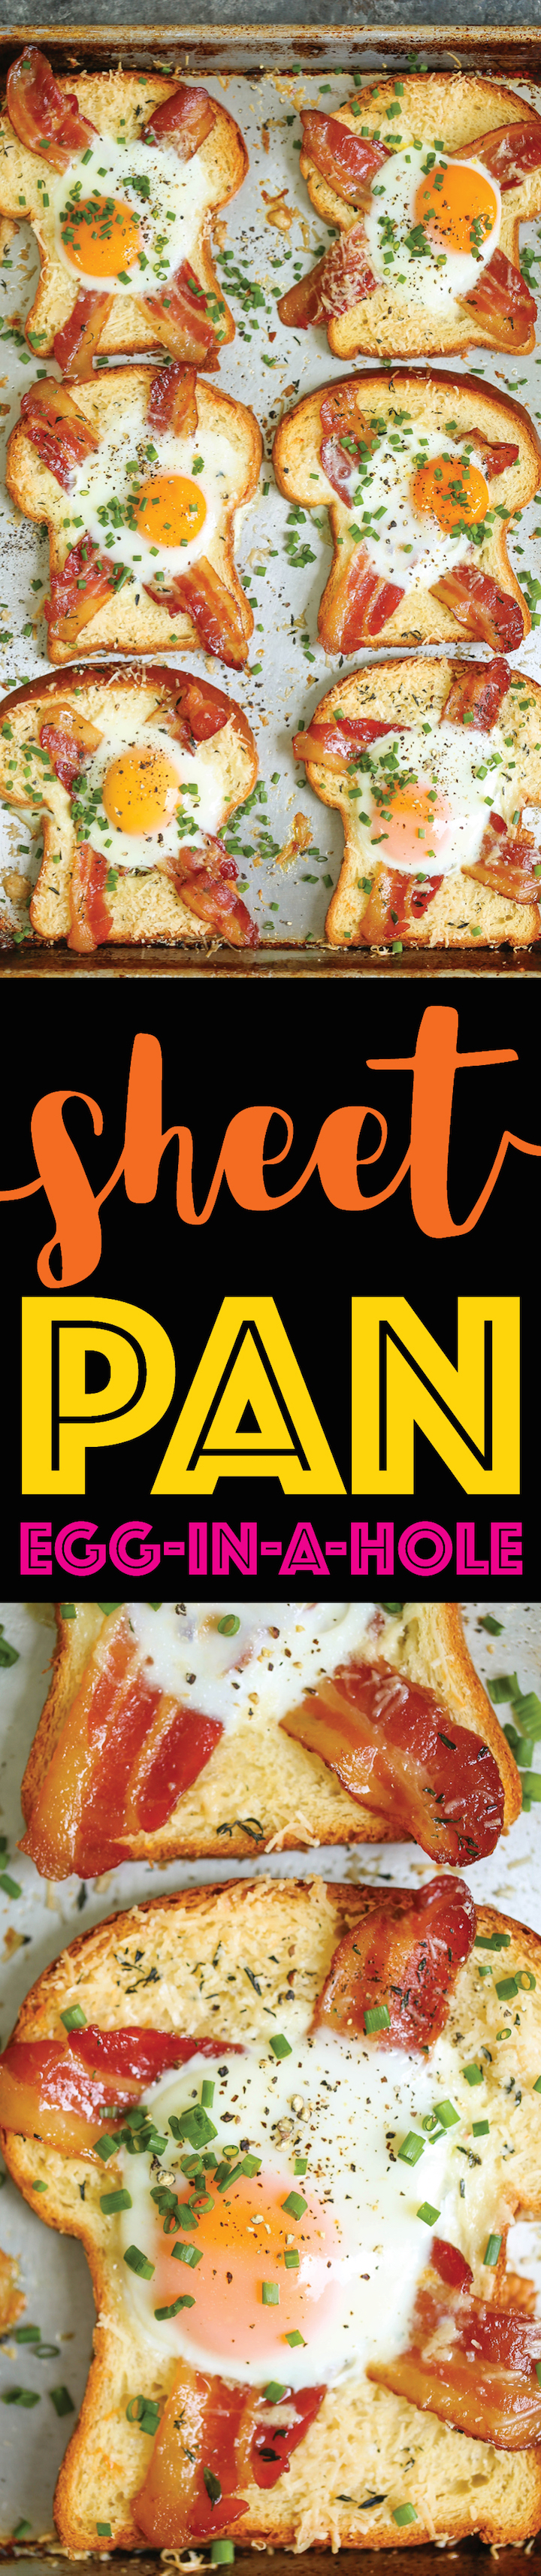 Sheet Pan Egg-in-a-Hole - A quick classic that comes together right on a sheet pan!!! Less mess, less fuss and just way easier than the stovetop version!